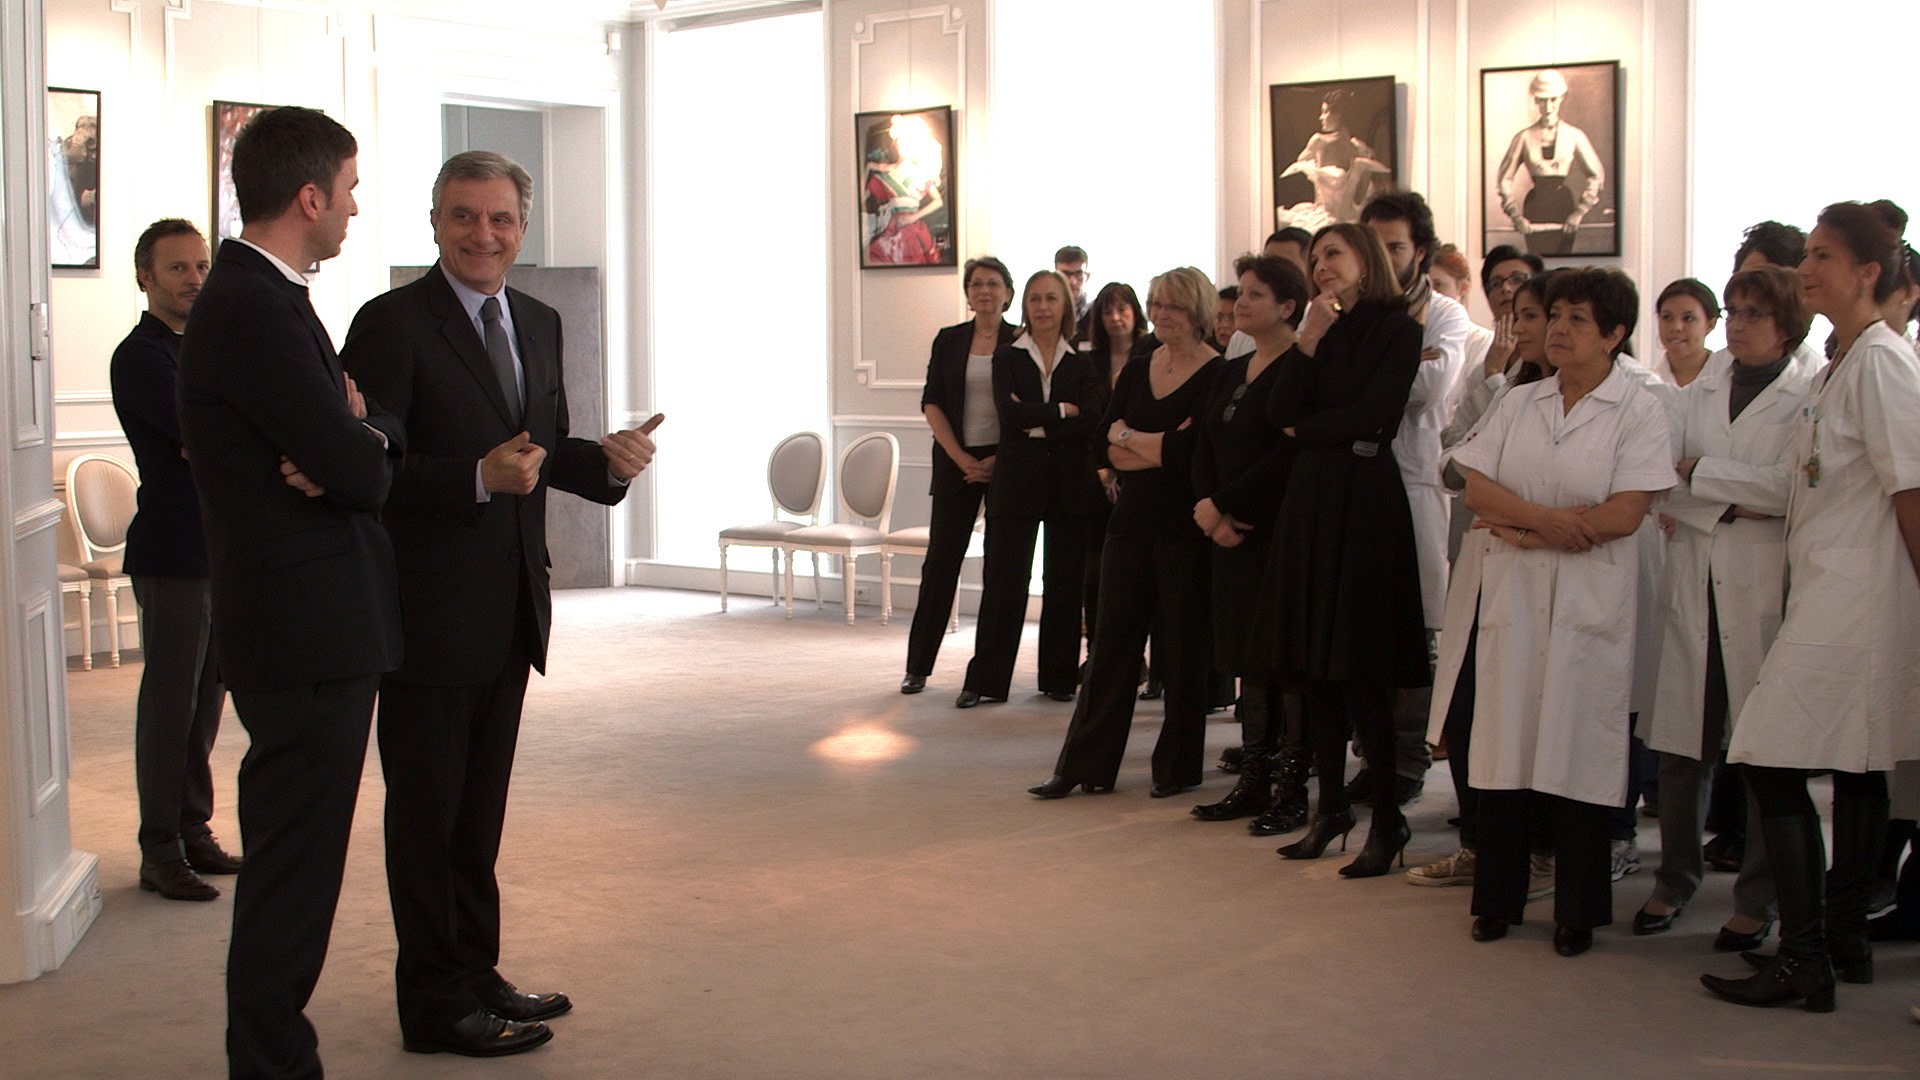 Raf Simons is introduced to Dior staff.